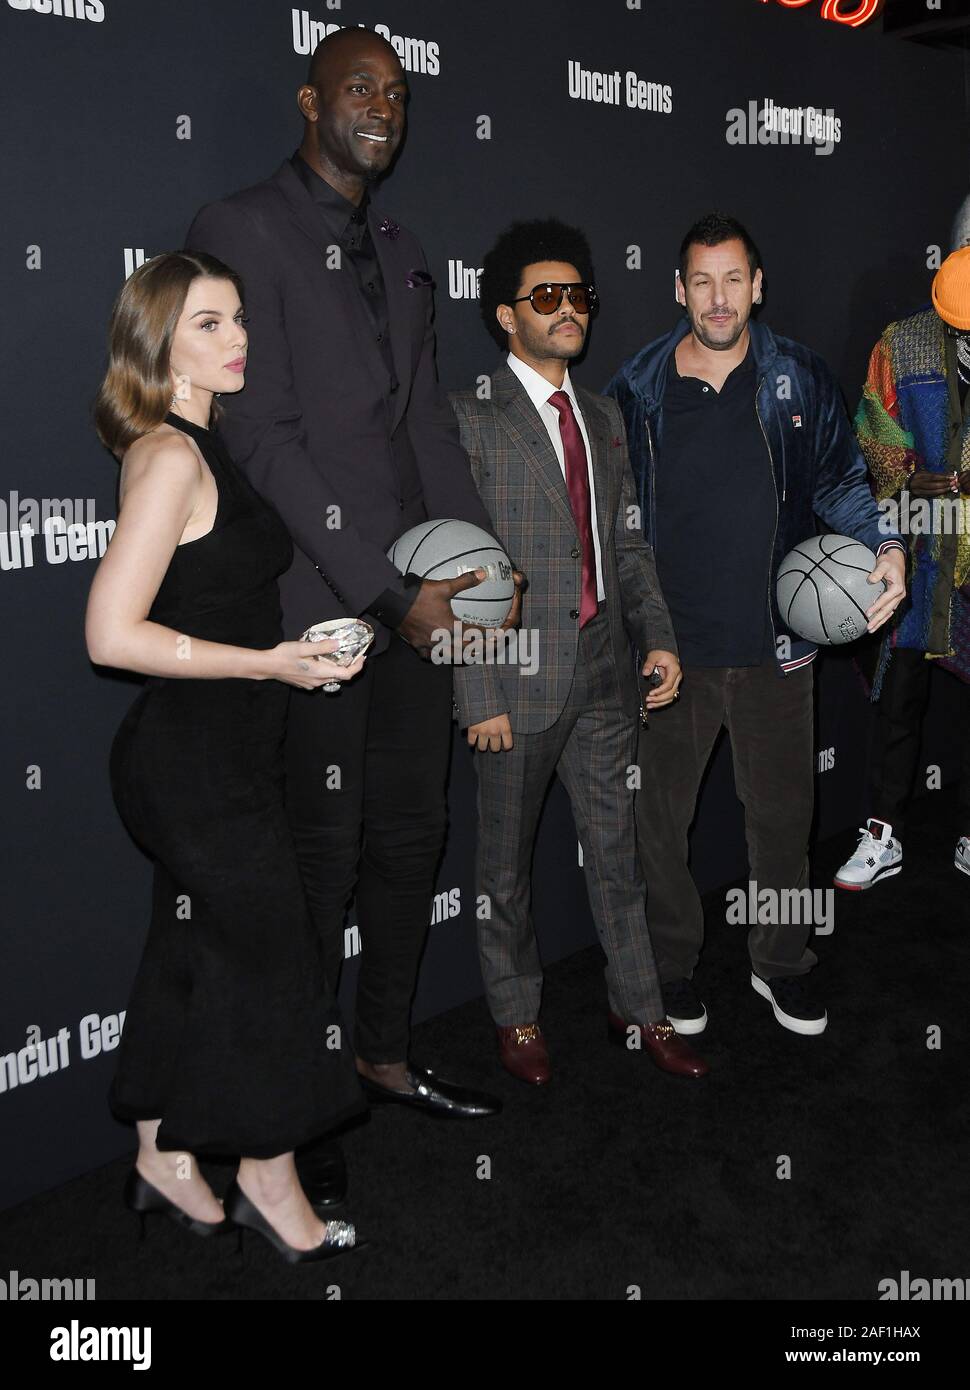 Los Angeles, USA. 11th Dec, 2019. (L-R) Julia Fox, Kevin Garnett, The Weeknd and Adam Sandler at the UNCUT GEMS Los Angeles Premiere held at the ArcLight Cinerama Dome in Los Angeles, CA on Wednesday, ?December 11, 2019. (Photo By Sthanlee B. Mirador/Sipa USA) Credit: Sipa USA/Alamy Live News Stock Photo